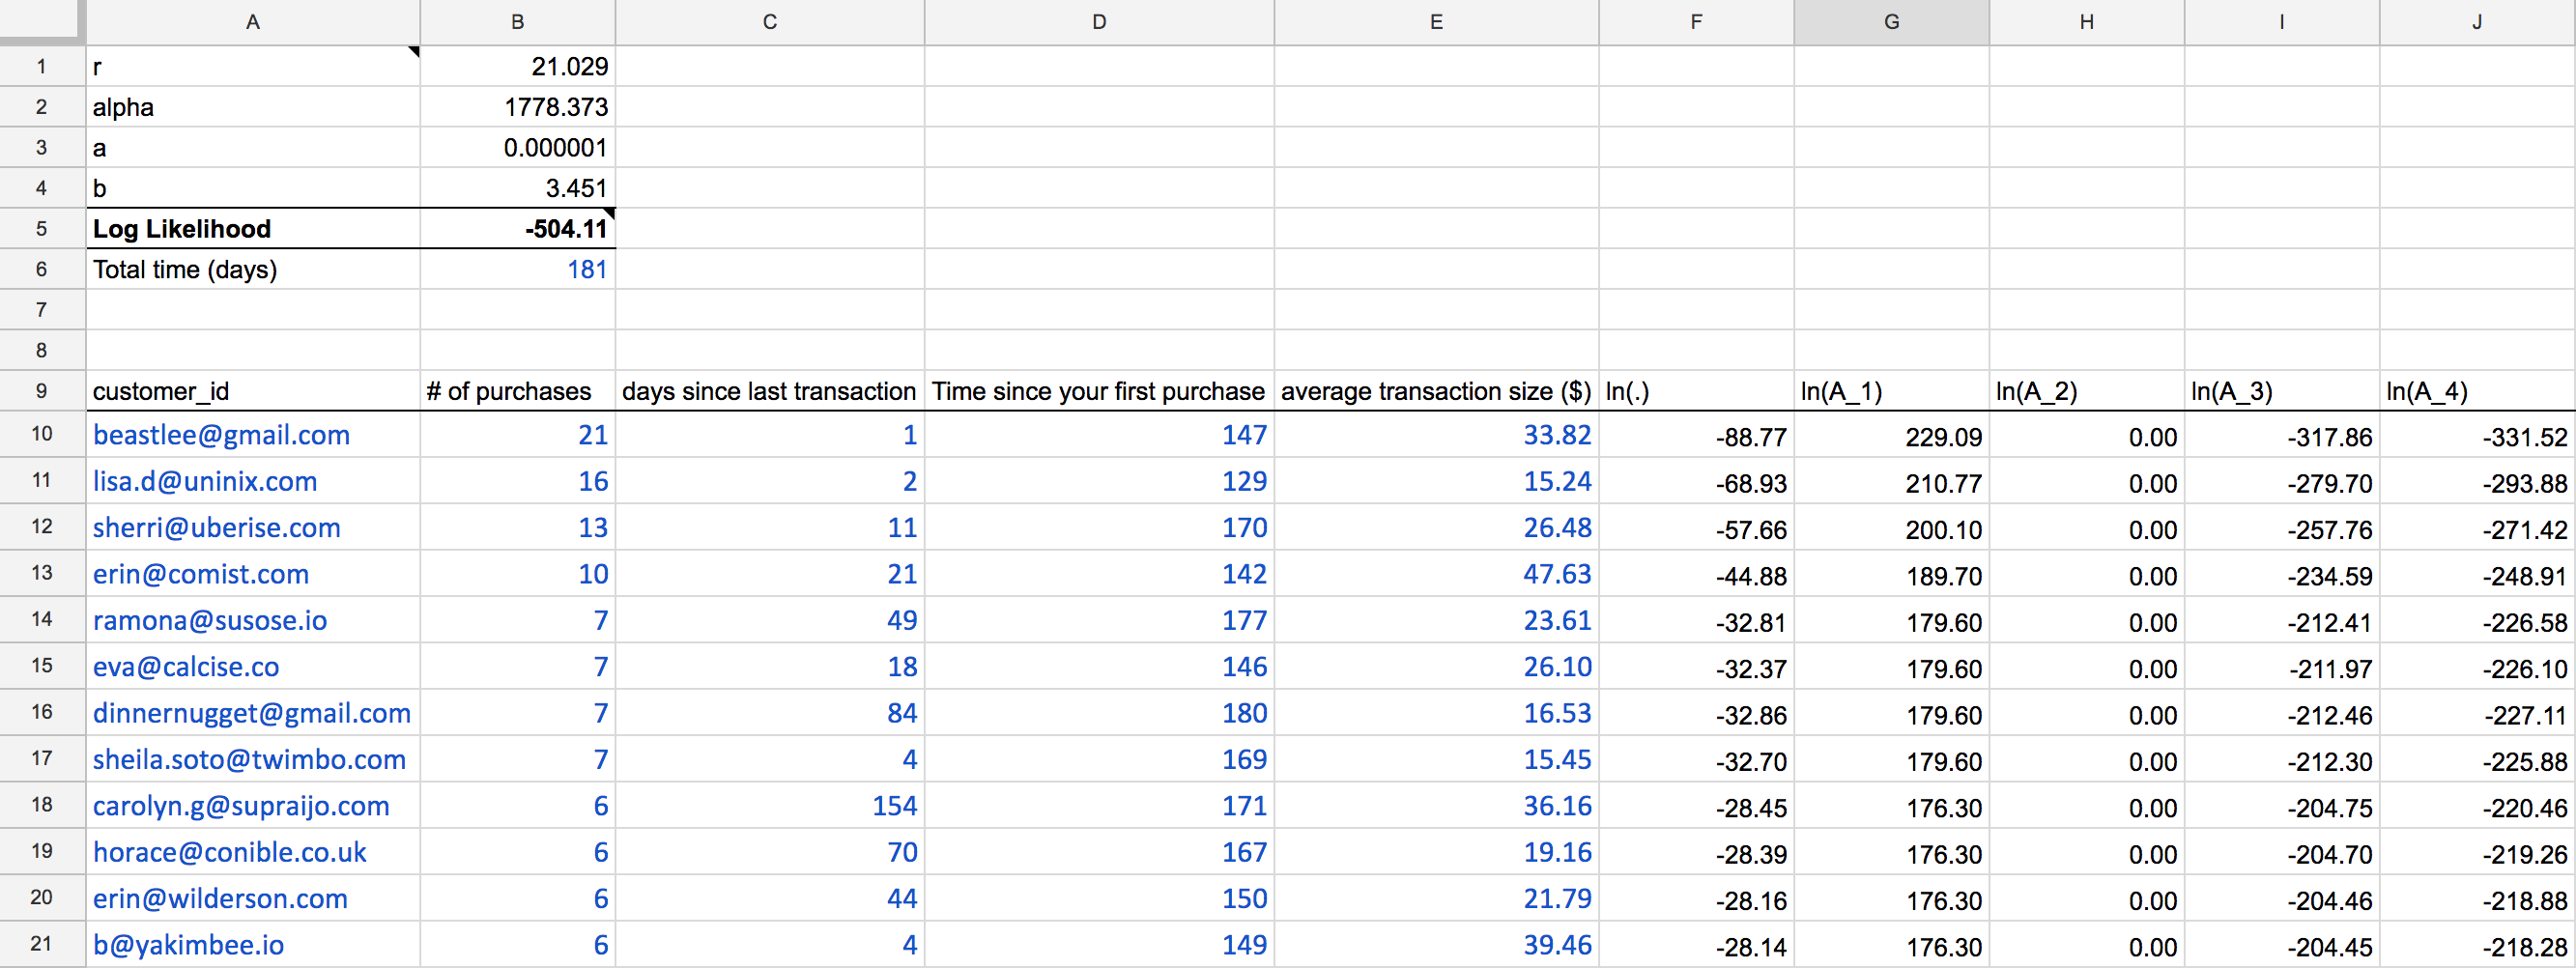 Screenshot of the Segment Tracking Plan Google Spreadsheet, with 11 user records.